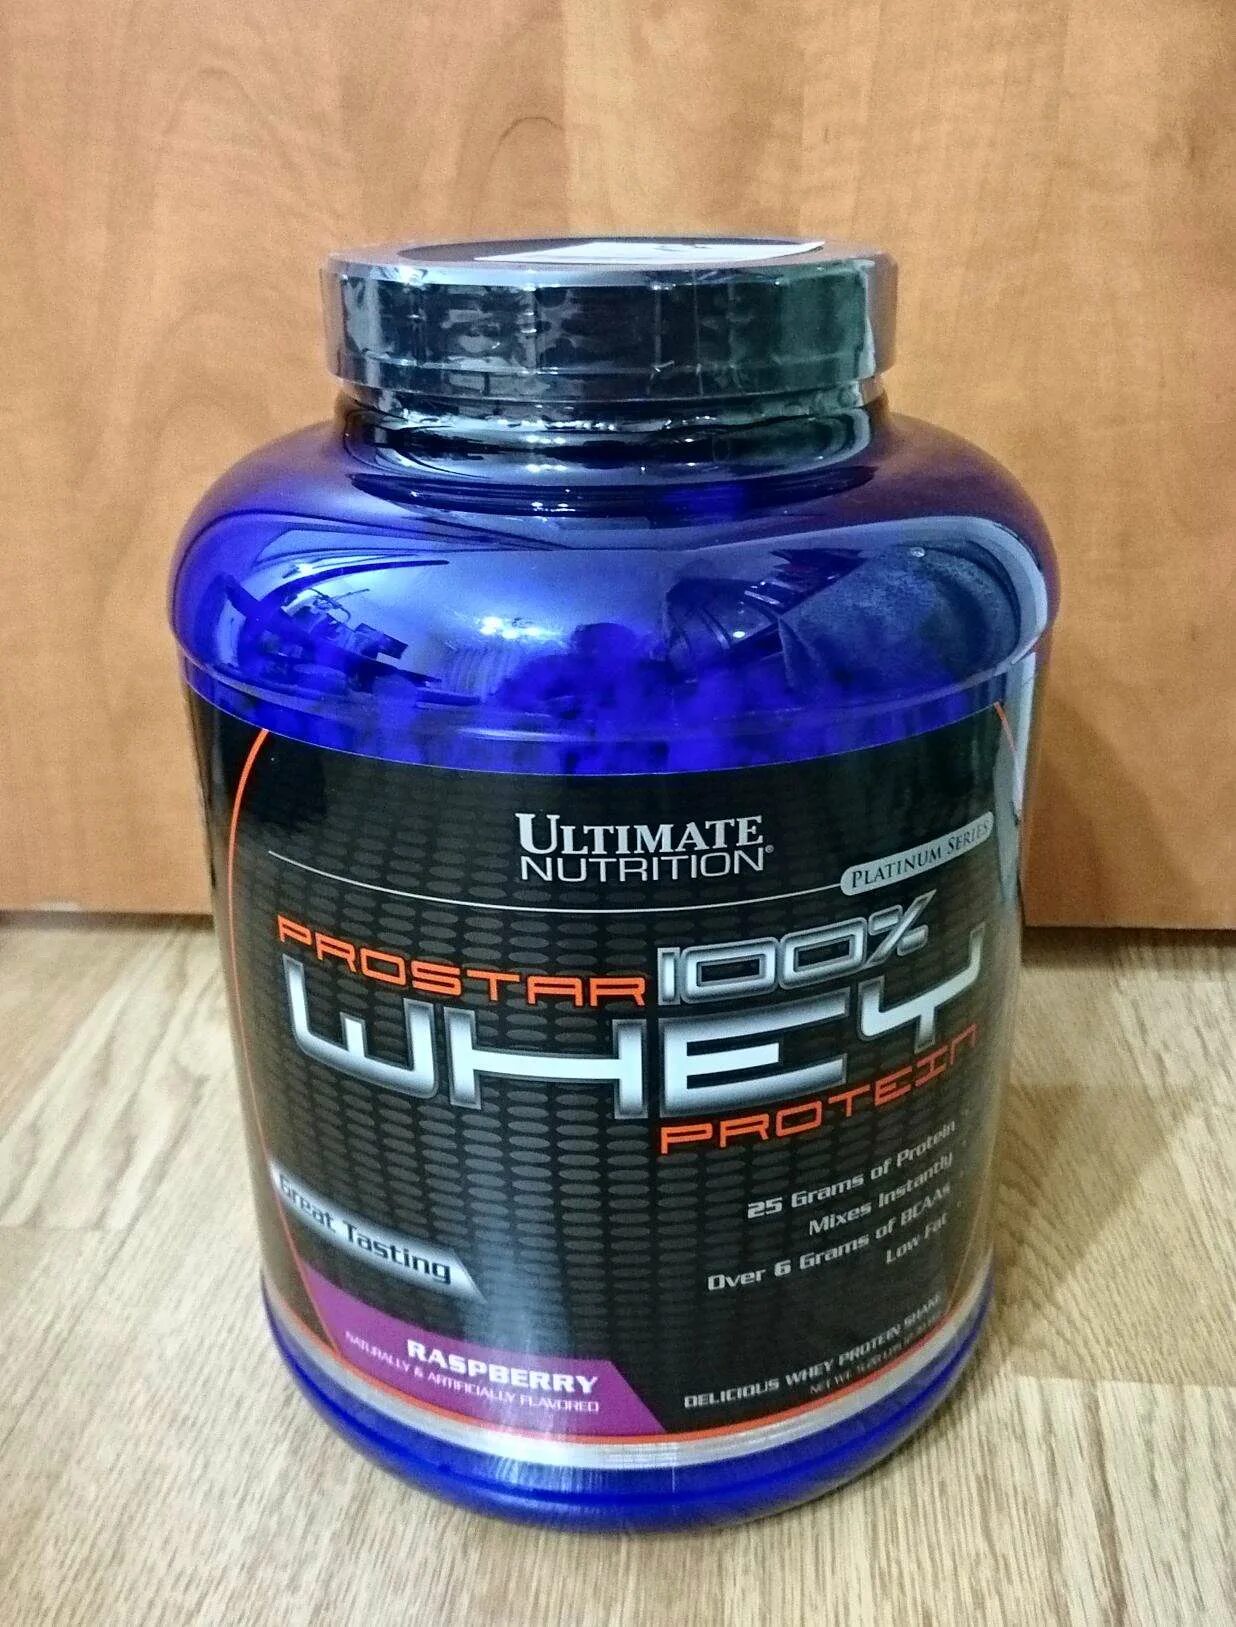 Ultimate Nutrition Prostar Whey. Ultimate Nutrition Prostar 100% Whey Protein (2.27-2.39 кг). Ultimate Nutrition Prostar 100% Whey Protein. Протеин сывороточный Ultimate Nutrition Prostar Whey малина 2349 гр..